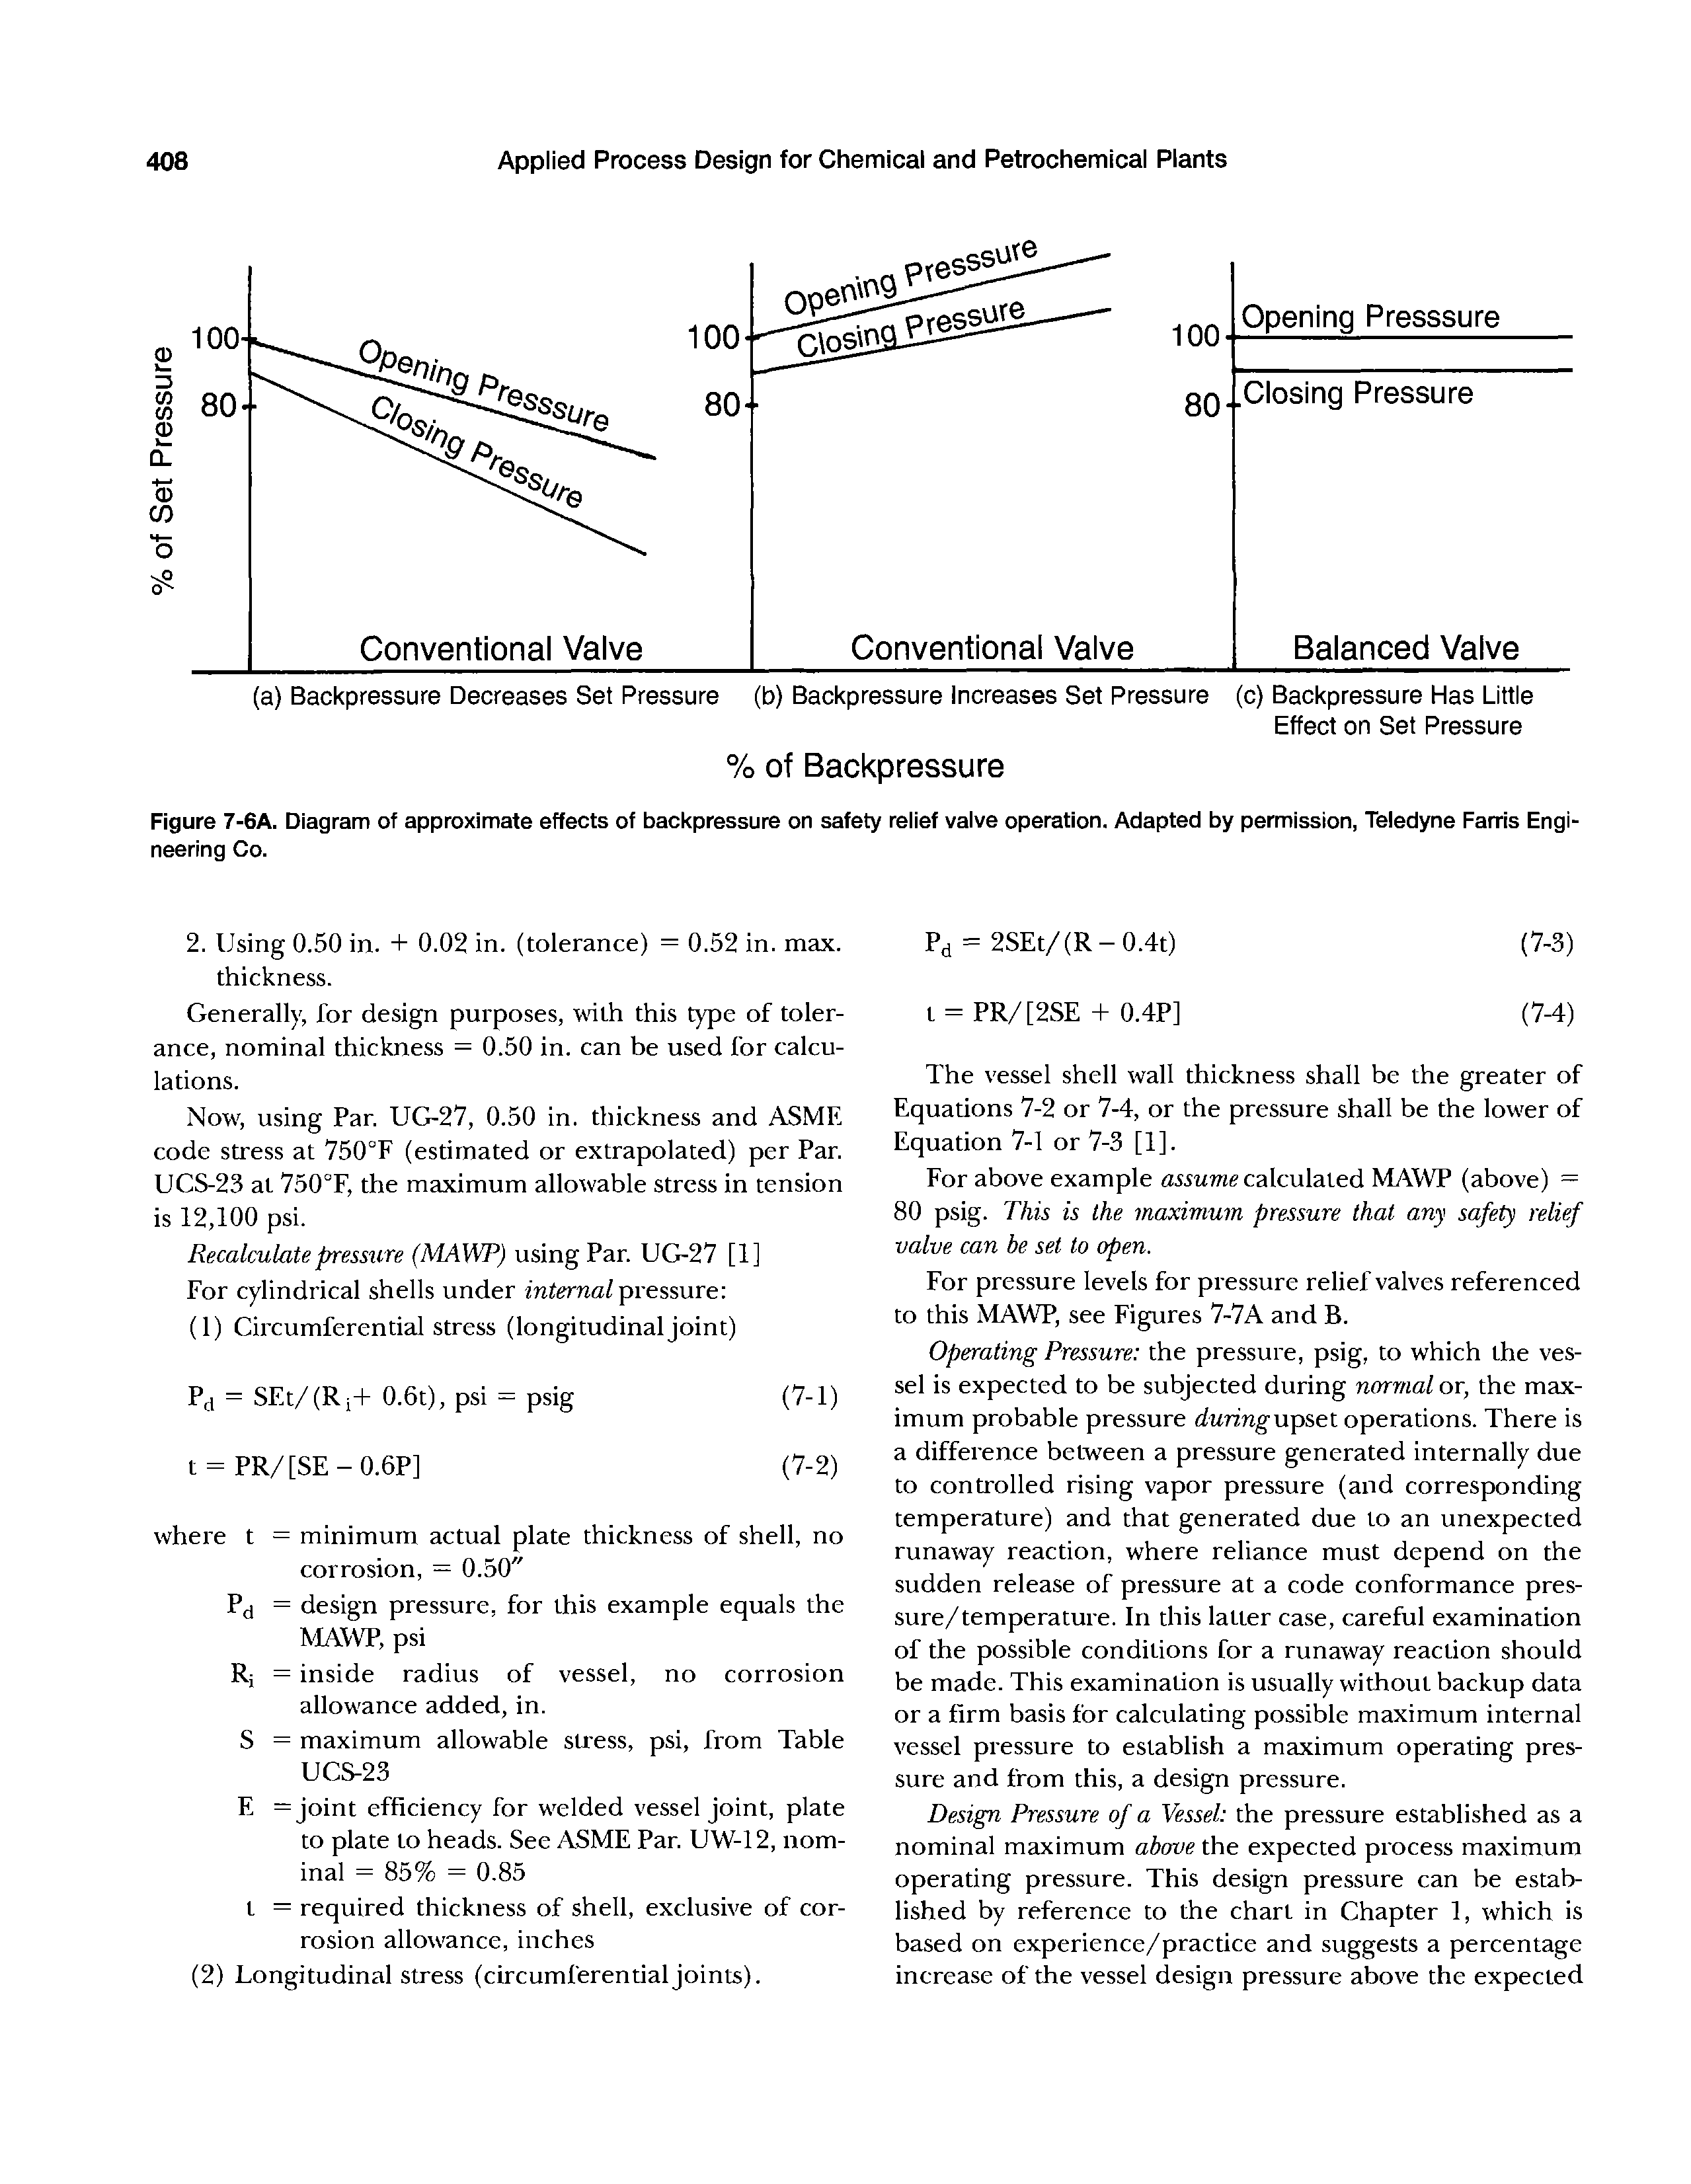 Figure 7-6A. Diagram of approximate effects of backpressure on safety reiief vaive operation. Adapted by permission, Teledyne Farris Engineering Co.